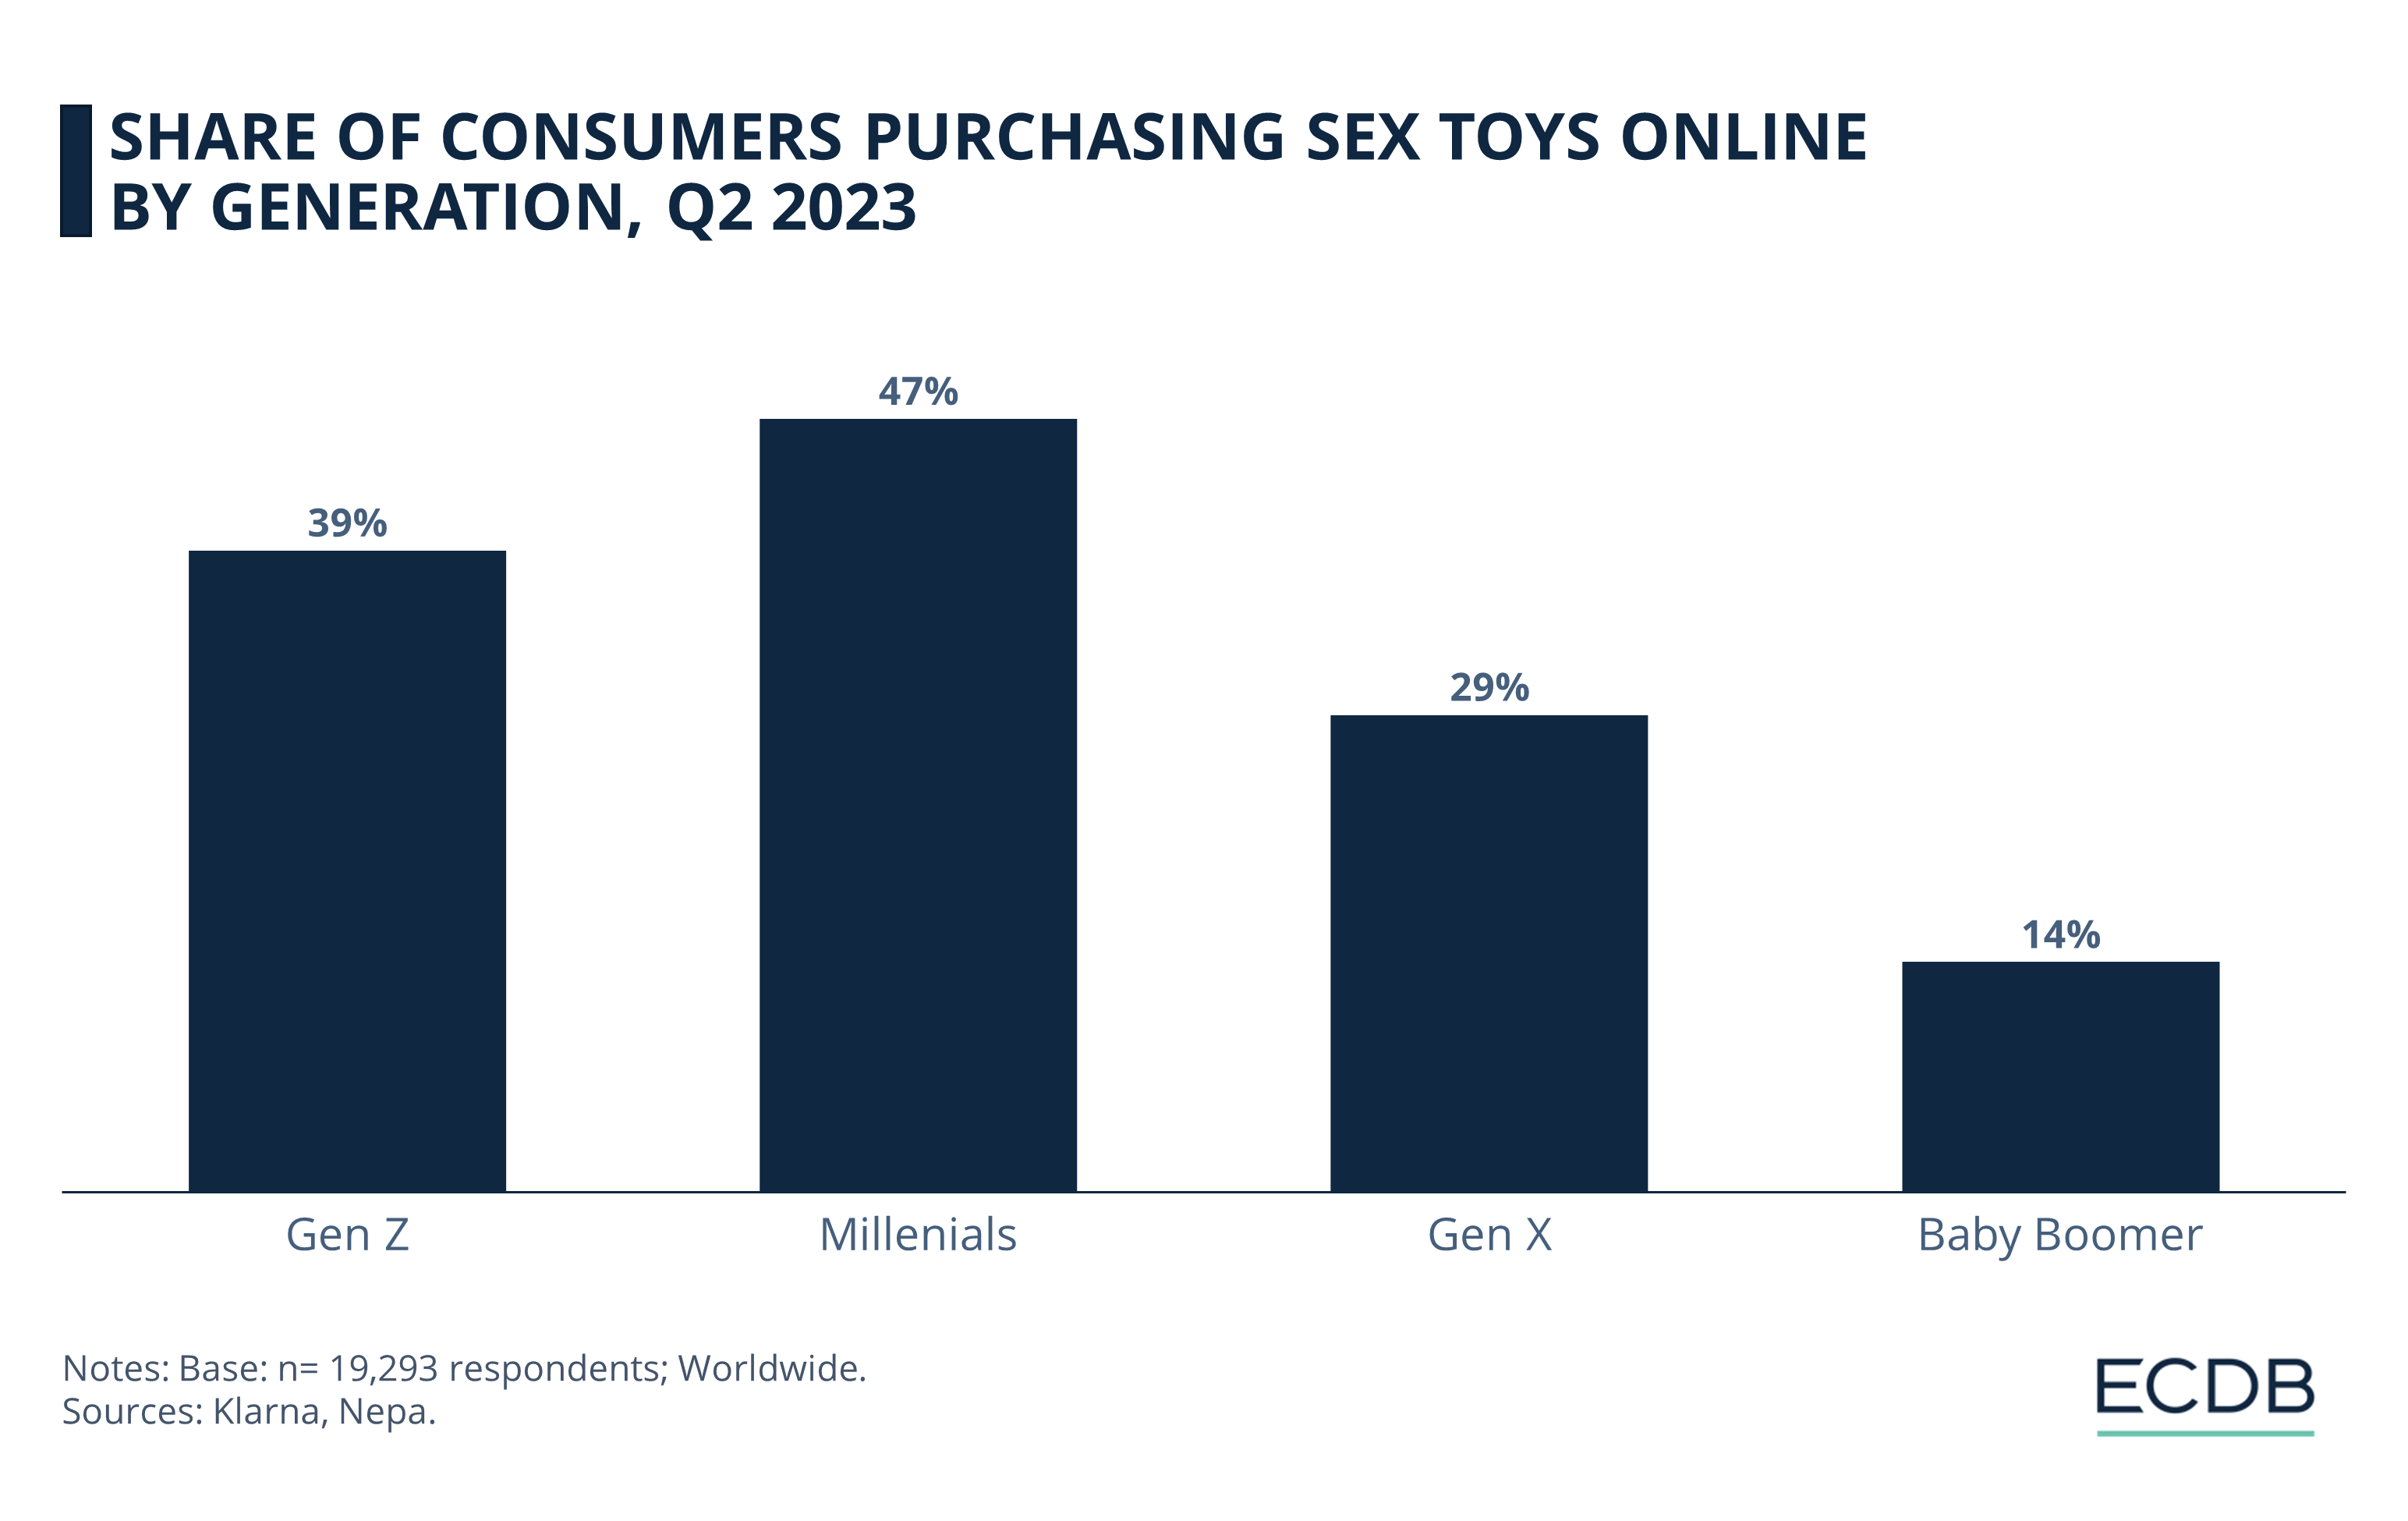 Share of Consumers Purchasing Sex Toys Online by Generation, Q2 2023